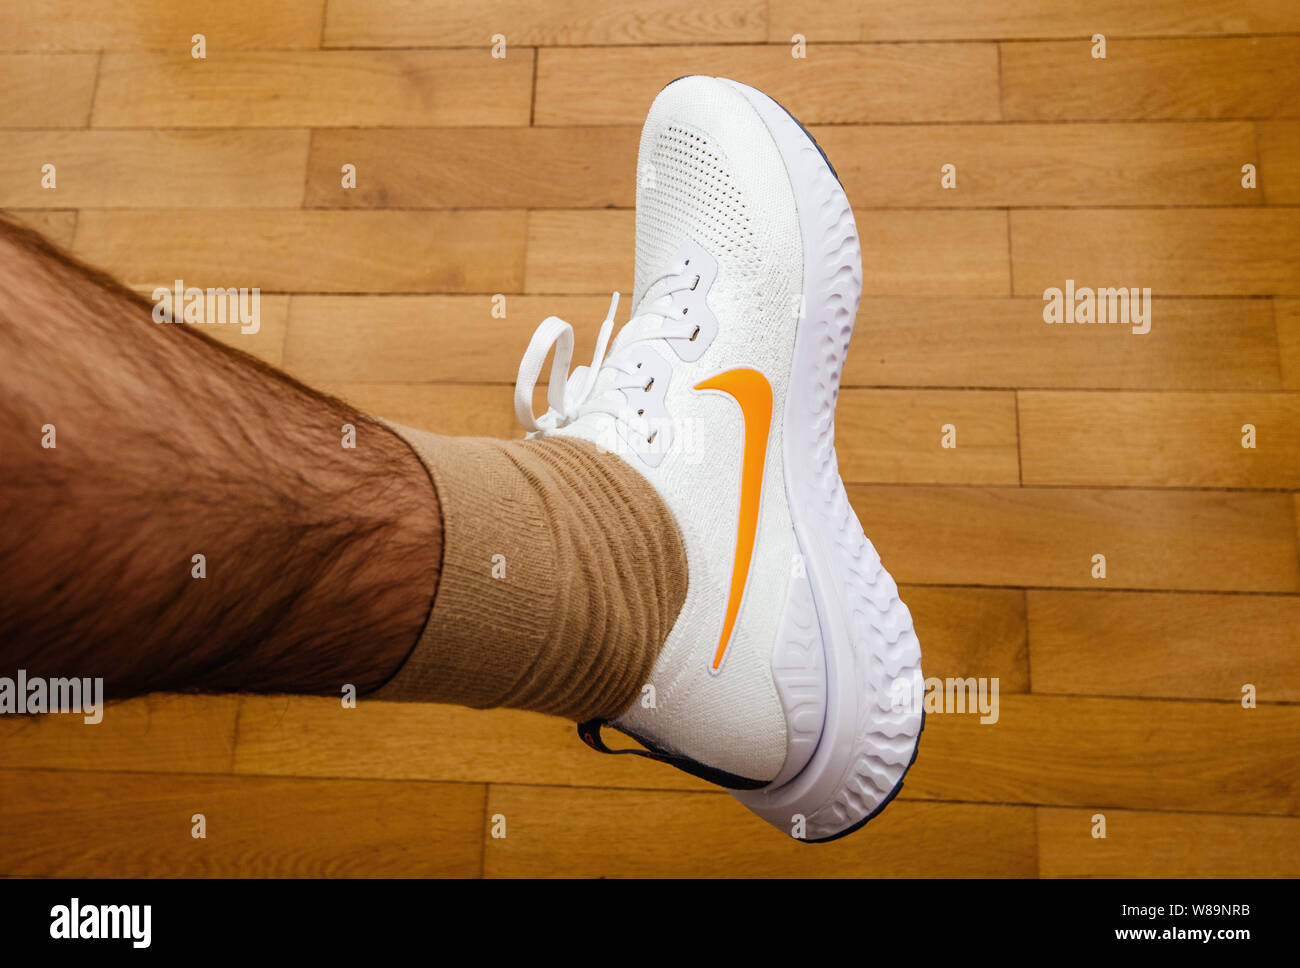 Paris France - Jul 13 2019: Man measuring new Nike Epic React Flyknit 2  running shoes equipment on the living room wooden floor - view from above  Stock Photo - Alamy